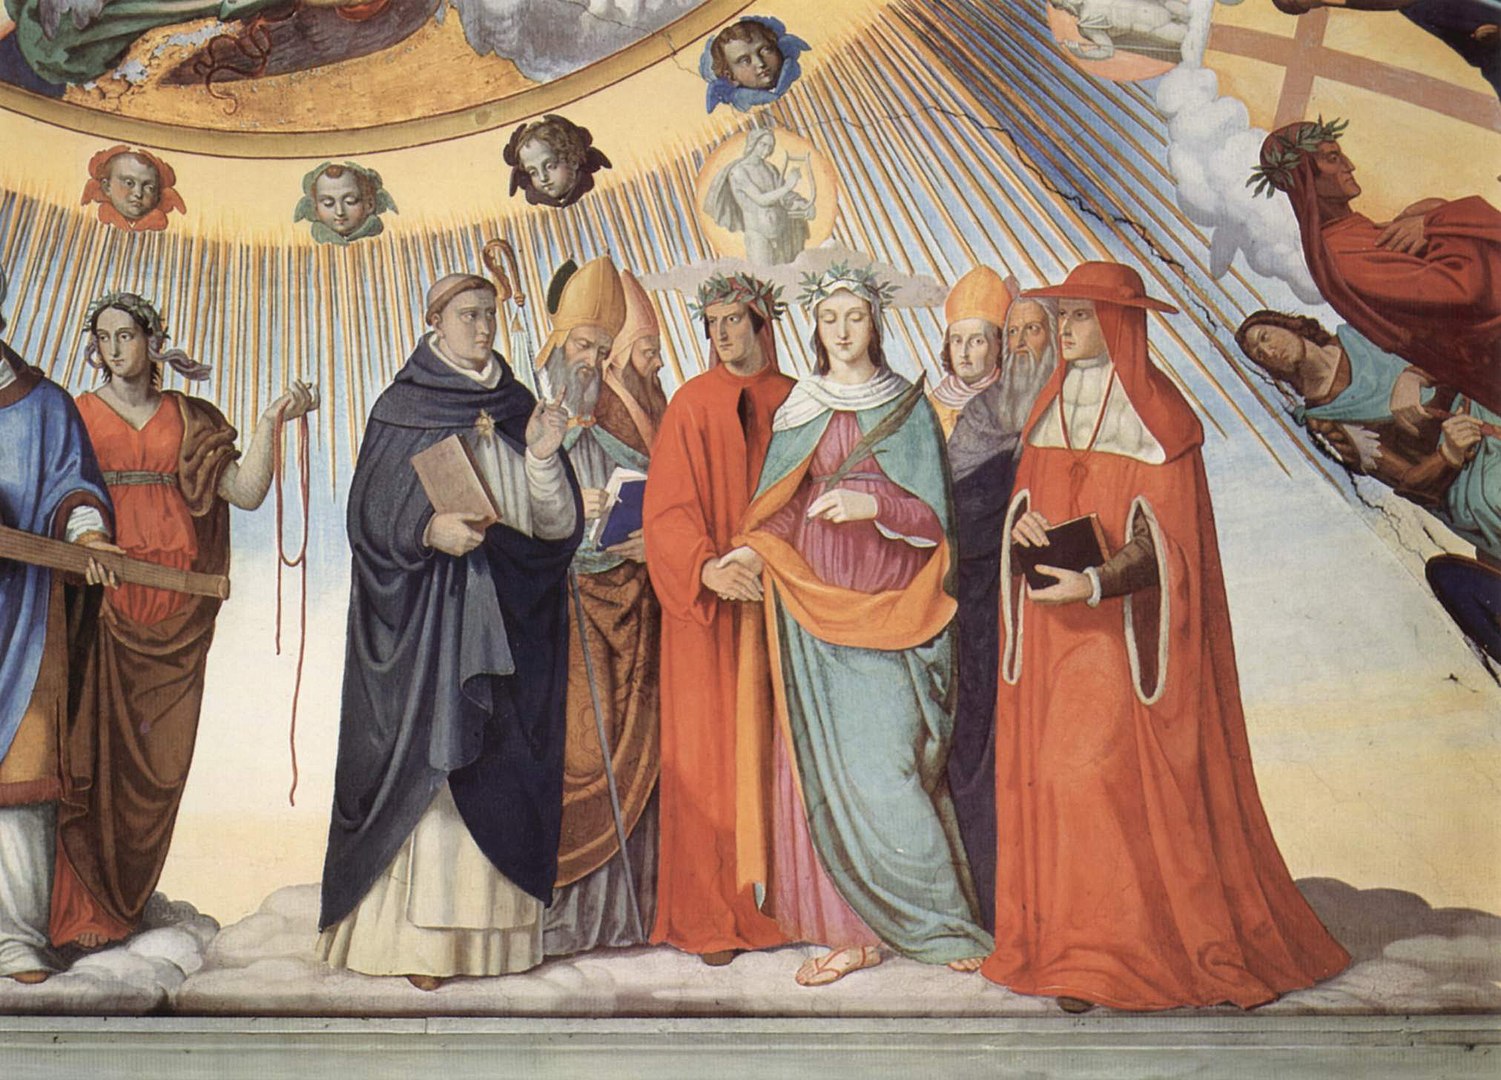 Dante and Beatrice speak to the teachers of wisdom Thomas Aquinas, Albertus Magnus, Peter Lombard and Sigier of Brabant in the Sphere of the Sun (fresco by Philipp Veit), Canto 10 (wikiCommons)